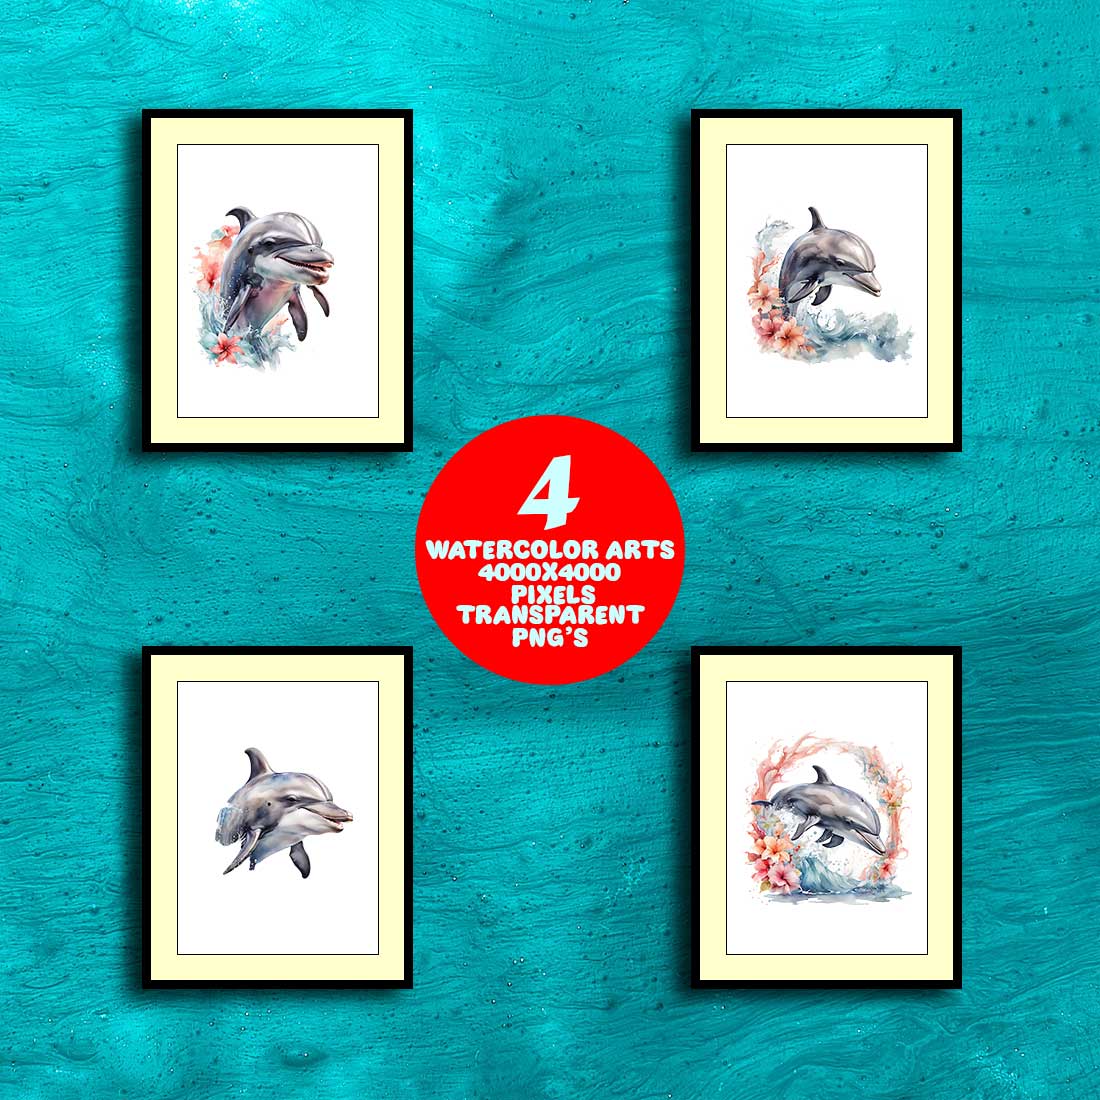 Dolphin Watercolor Art 4 Transparent PNG Illustrations cover image.